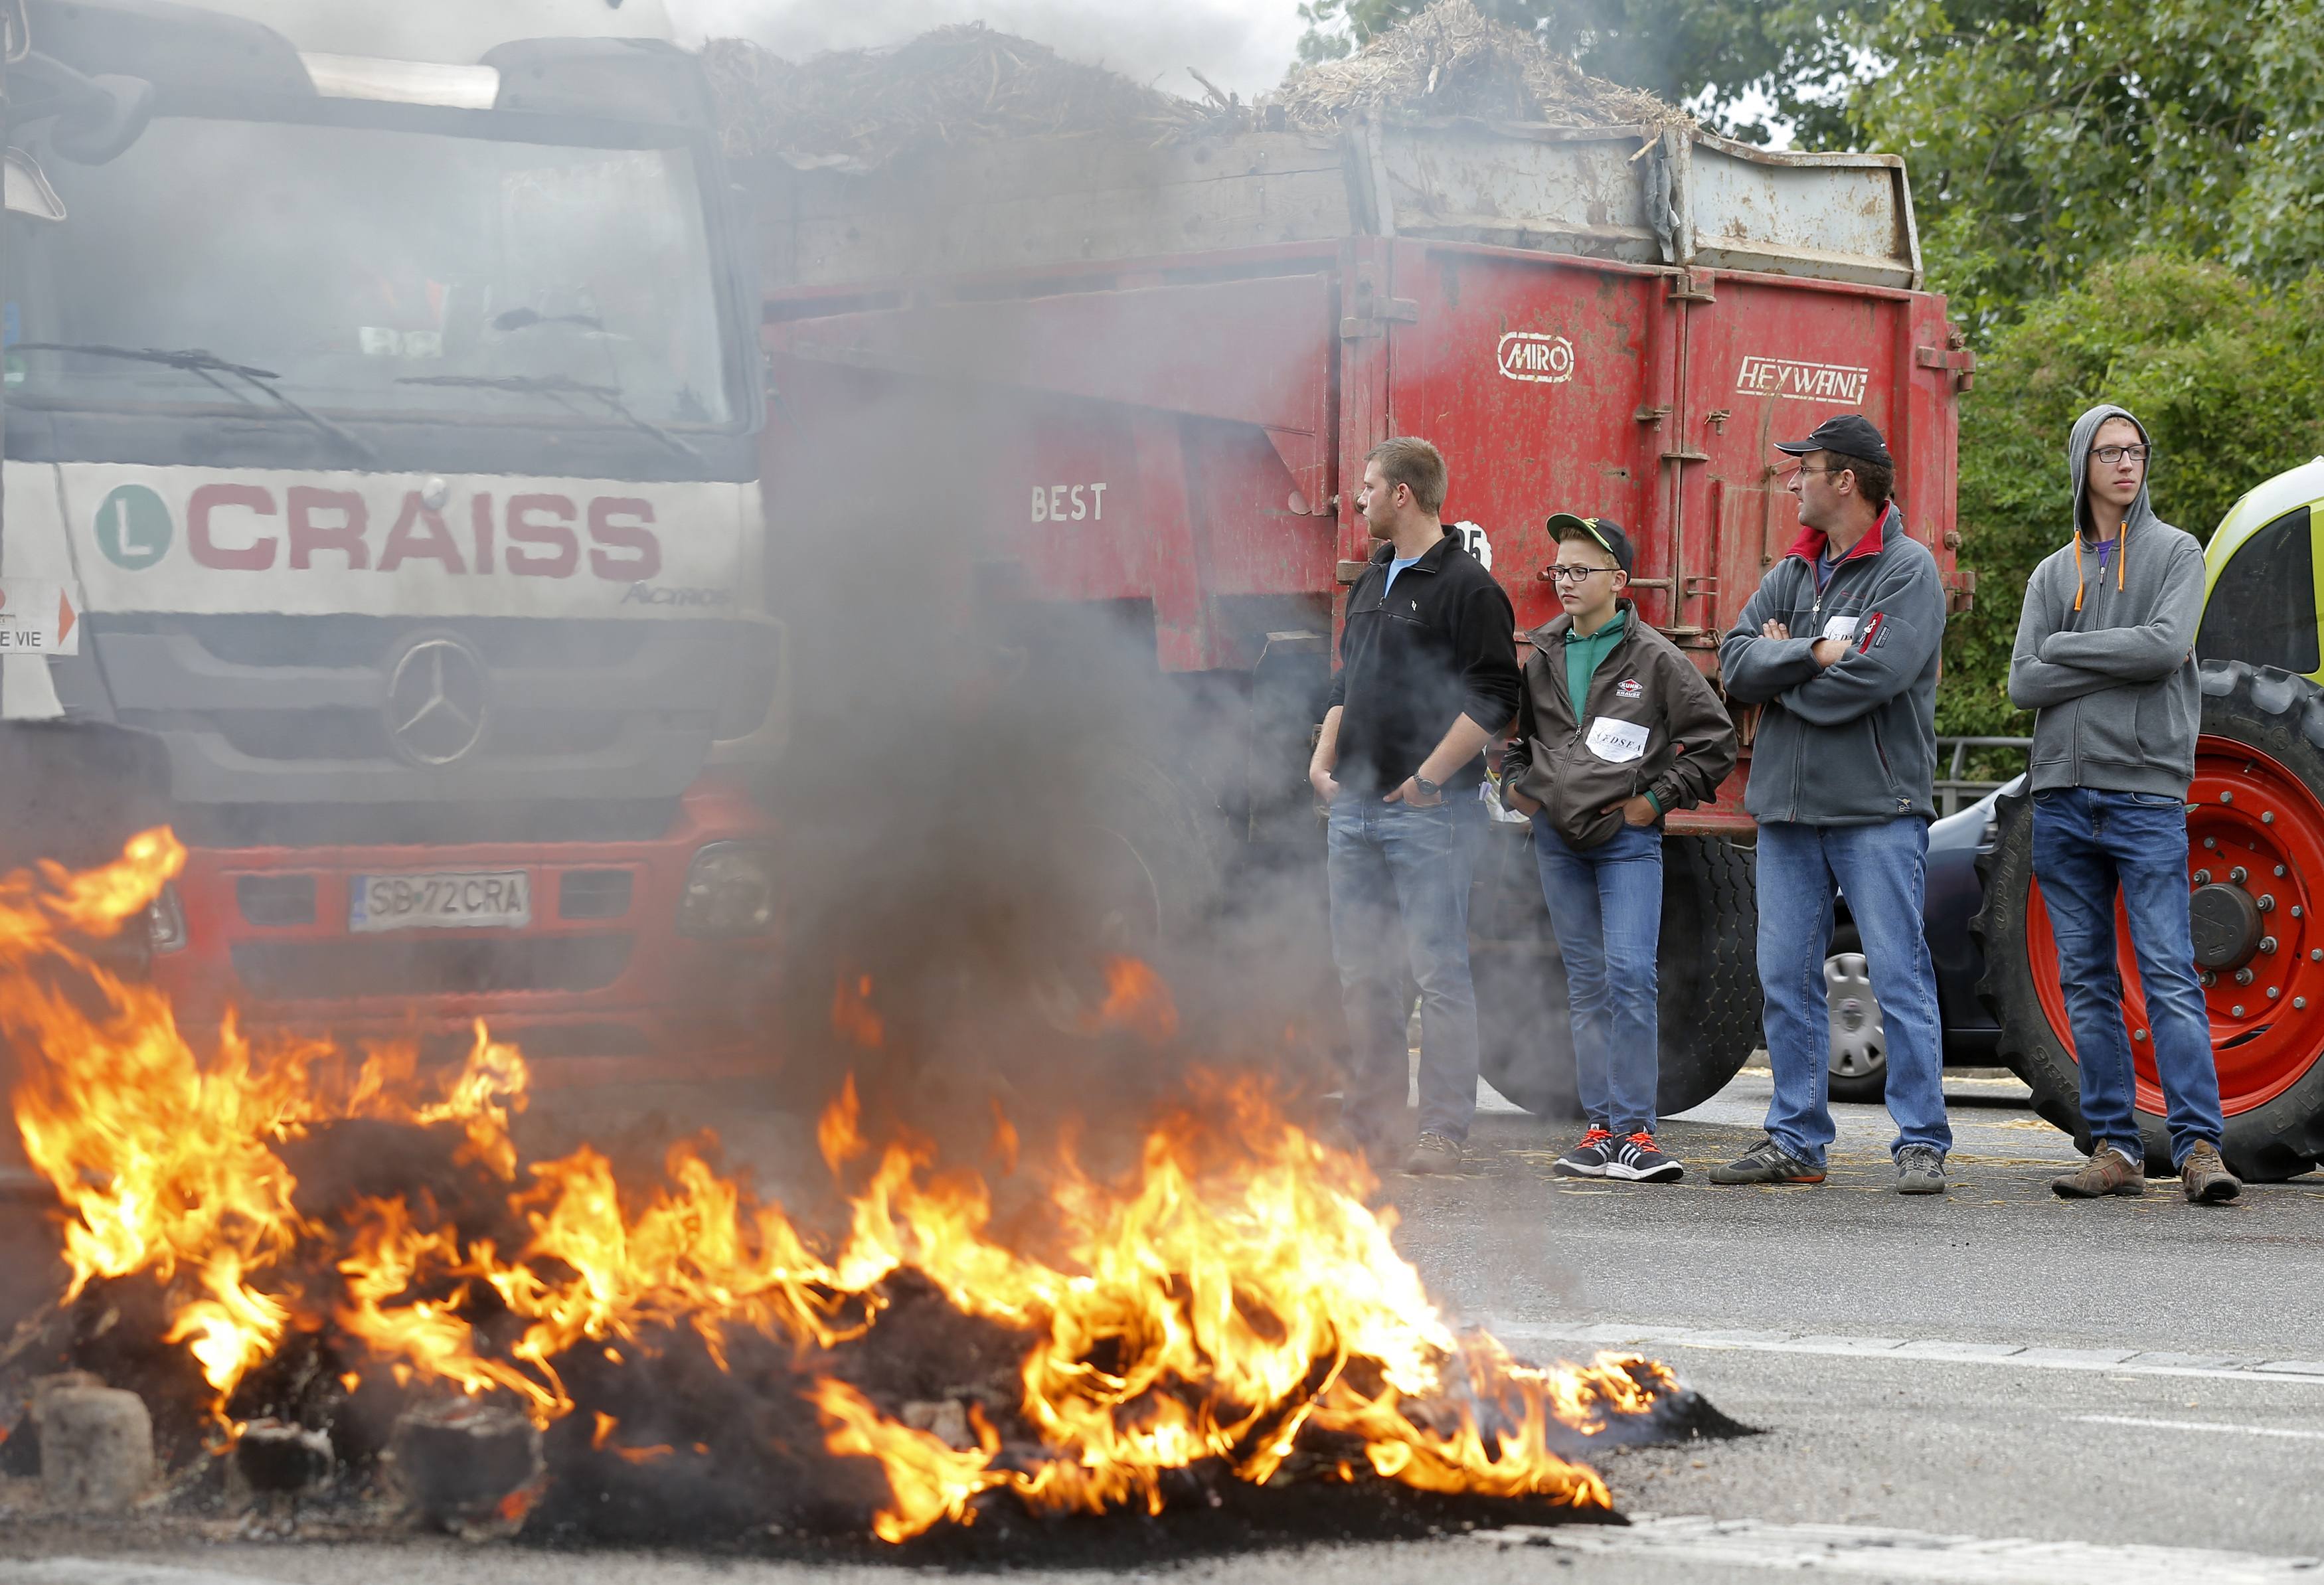 French farmers block trucks that transport food goods coming from foreign countries at the French German border in Strasbourg, France, during a protest against a squeeze in margins by retailers and food processors.